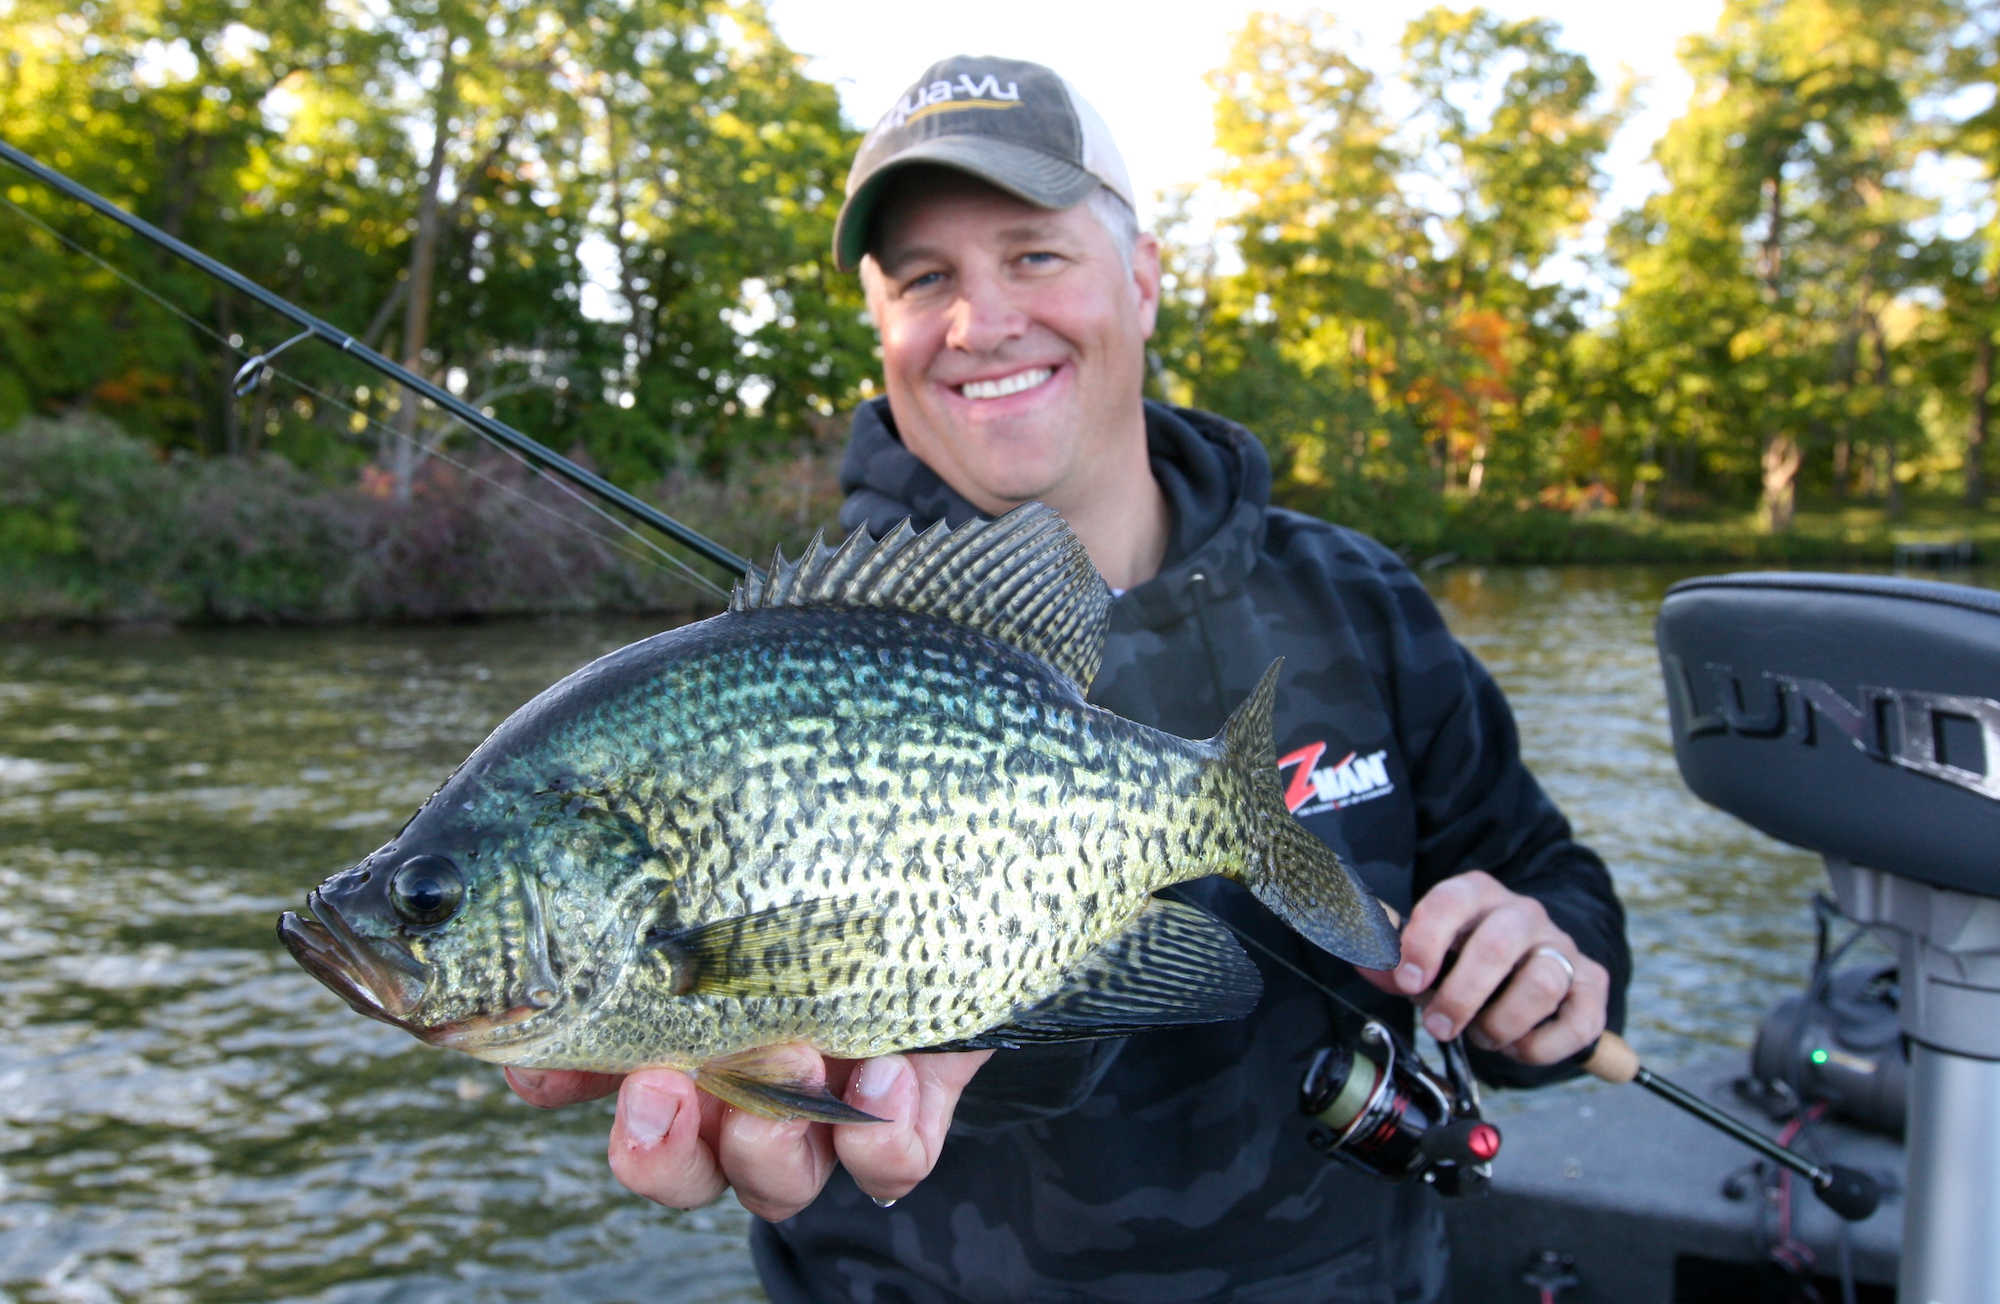 10 Best Crappie Lures, Sports & outdoors